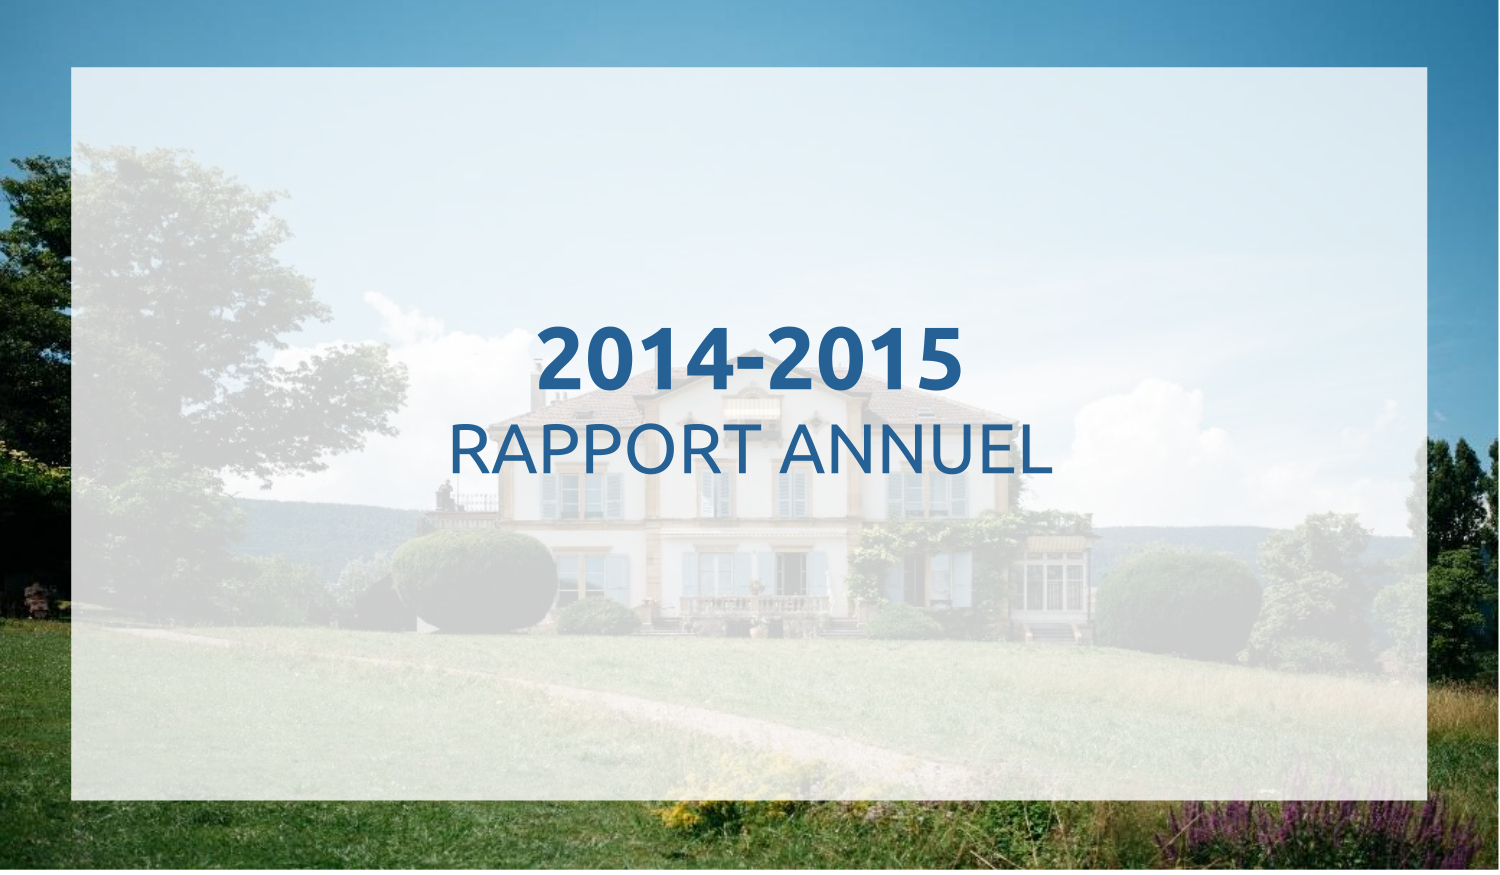 Rapport annuel 2014-2015_PerspectivePlus 2